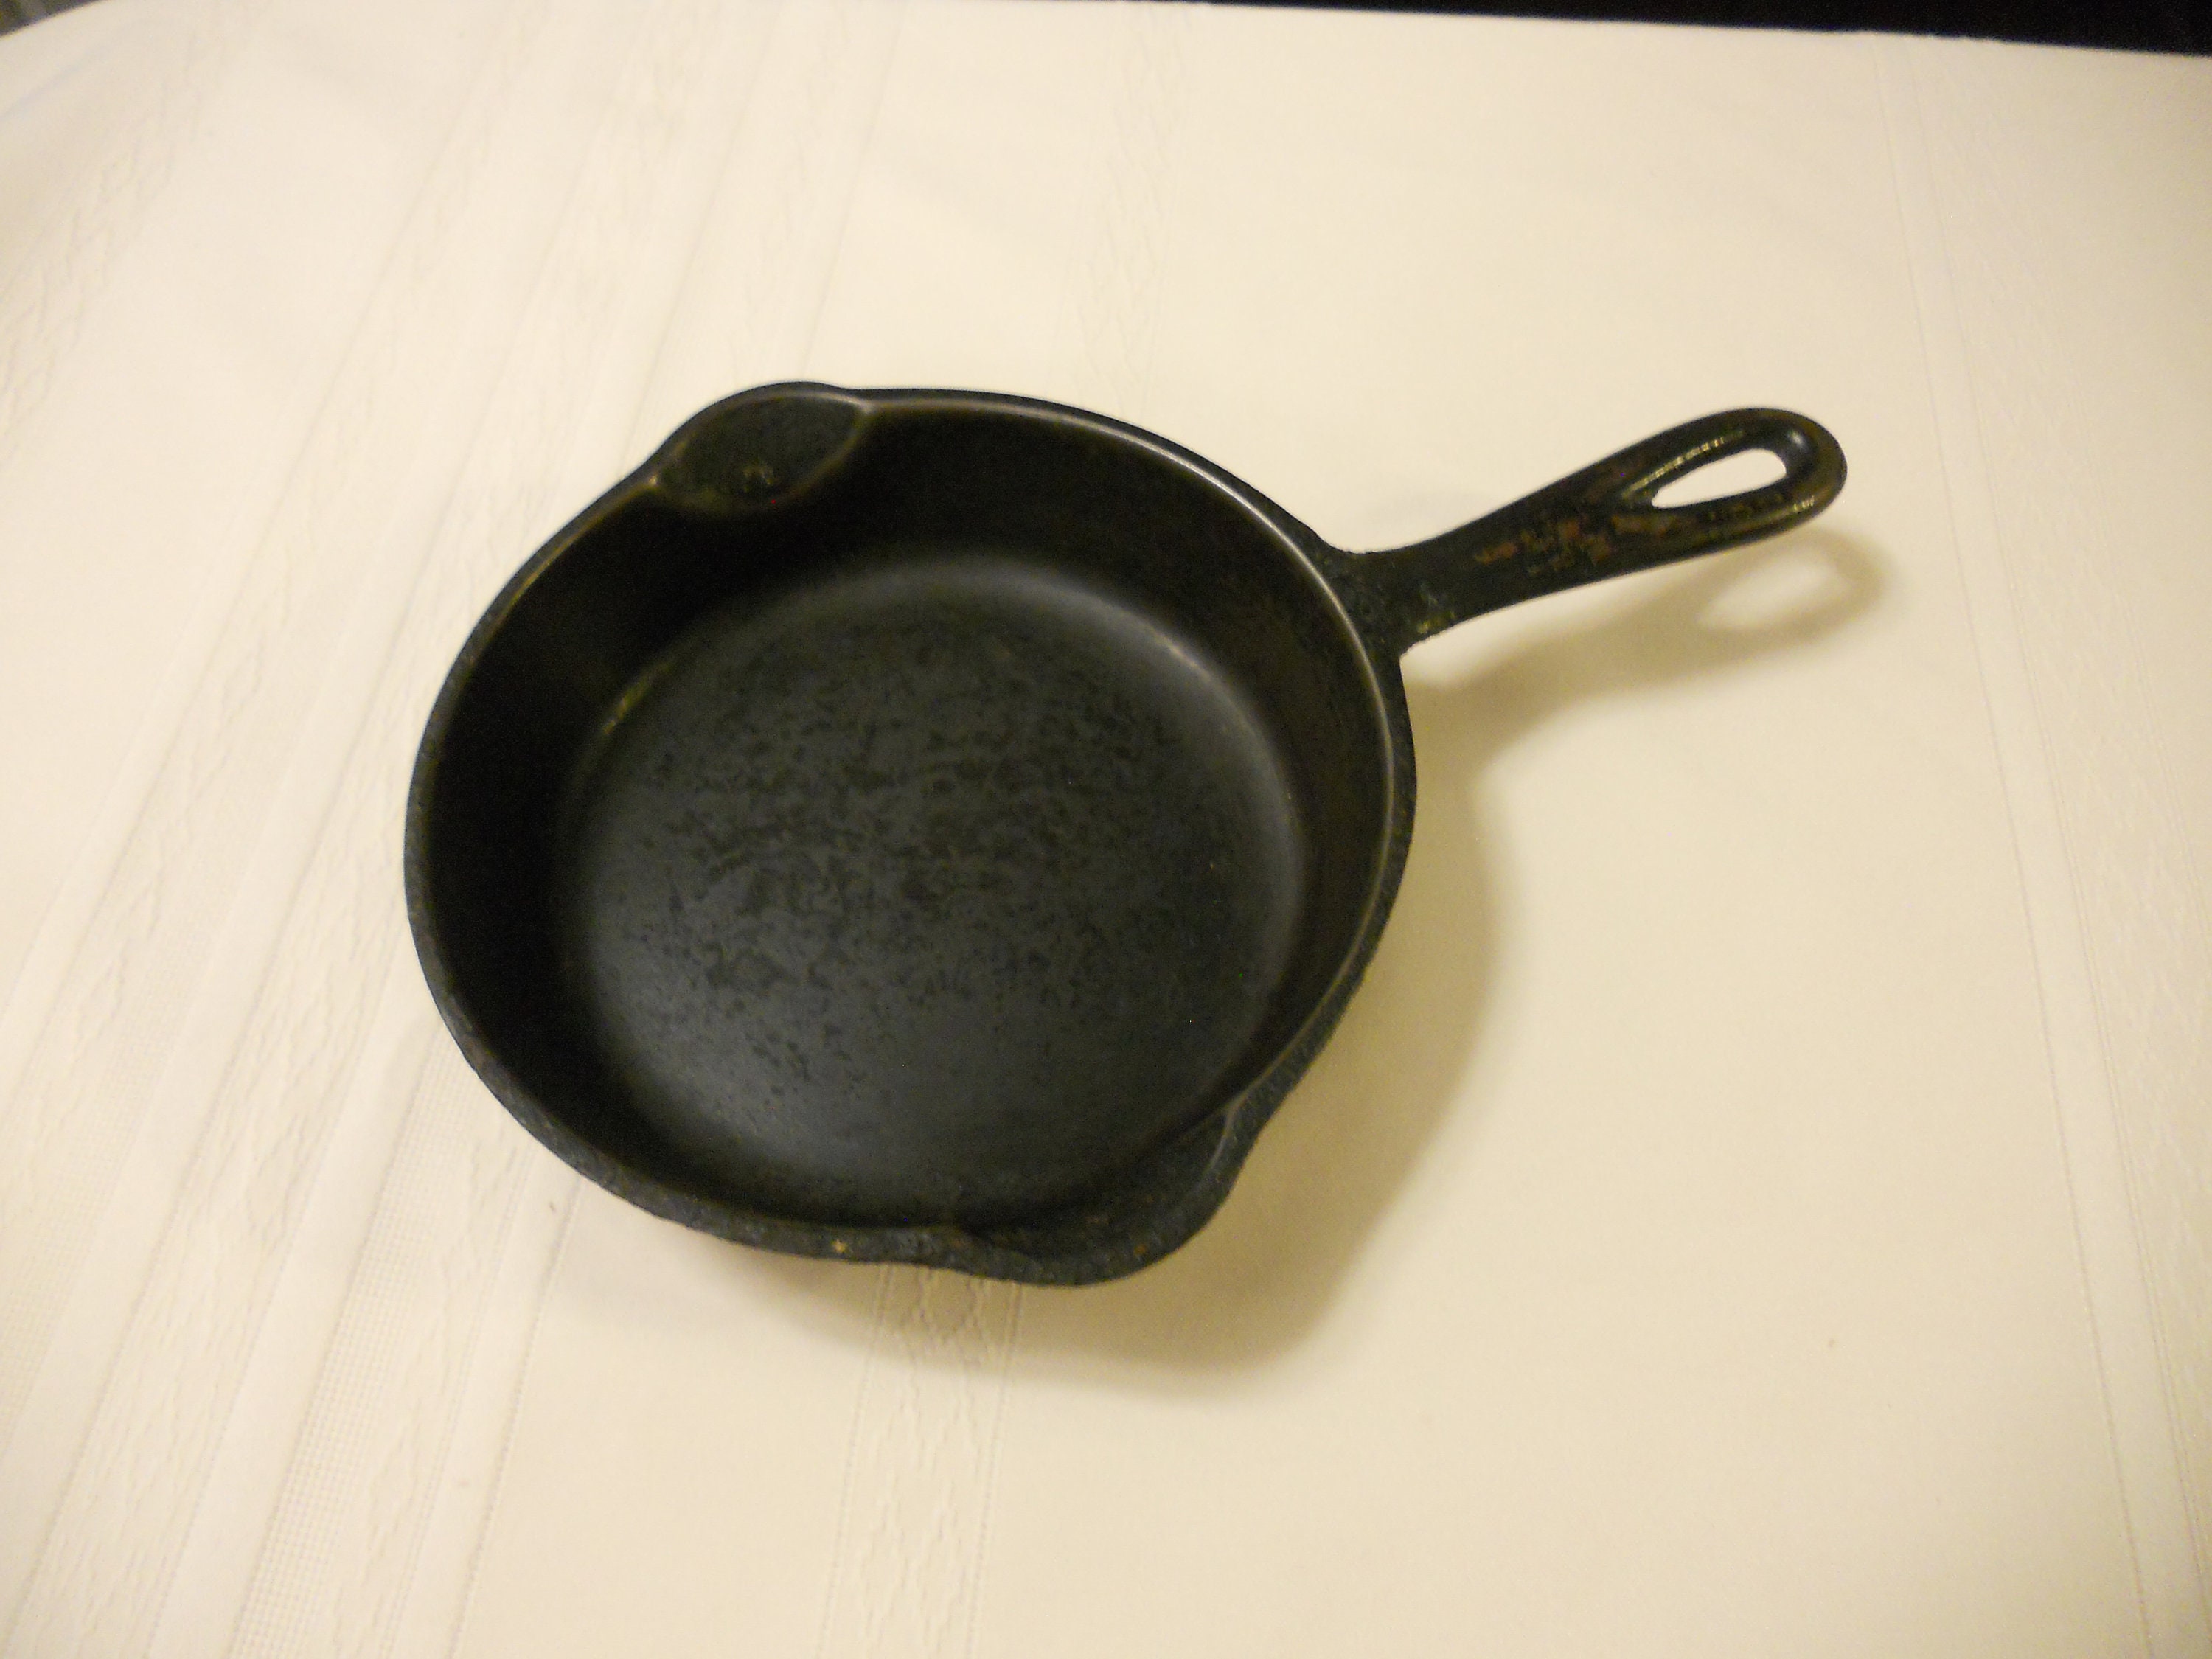 Palm 9.5 Unseasoned Cast Iron Grill Pan New Gifts For Him Her